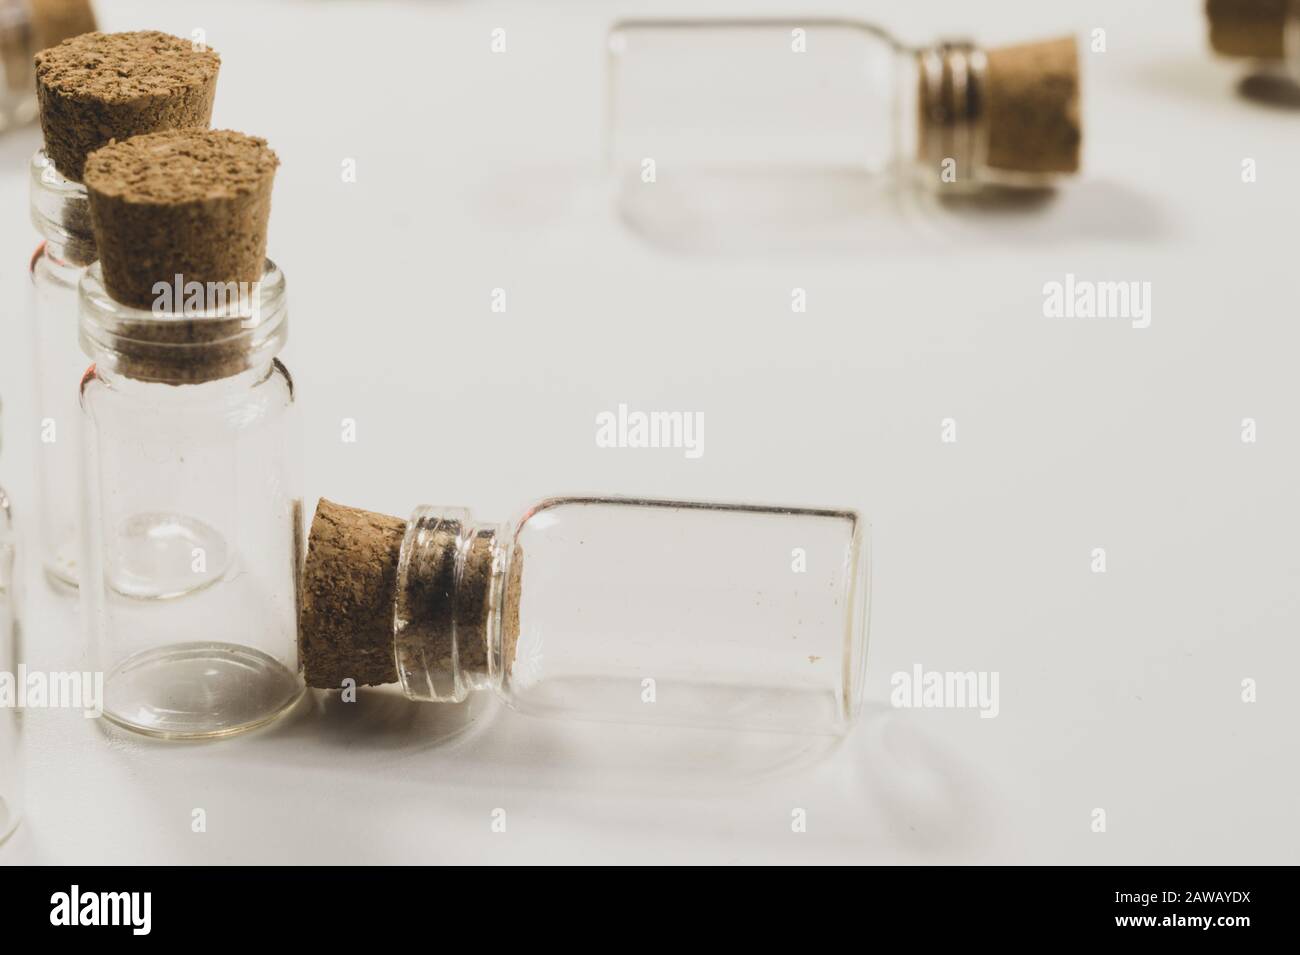 Empty little bottles with cork stopper isolated on white Stock Photo